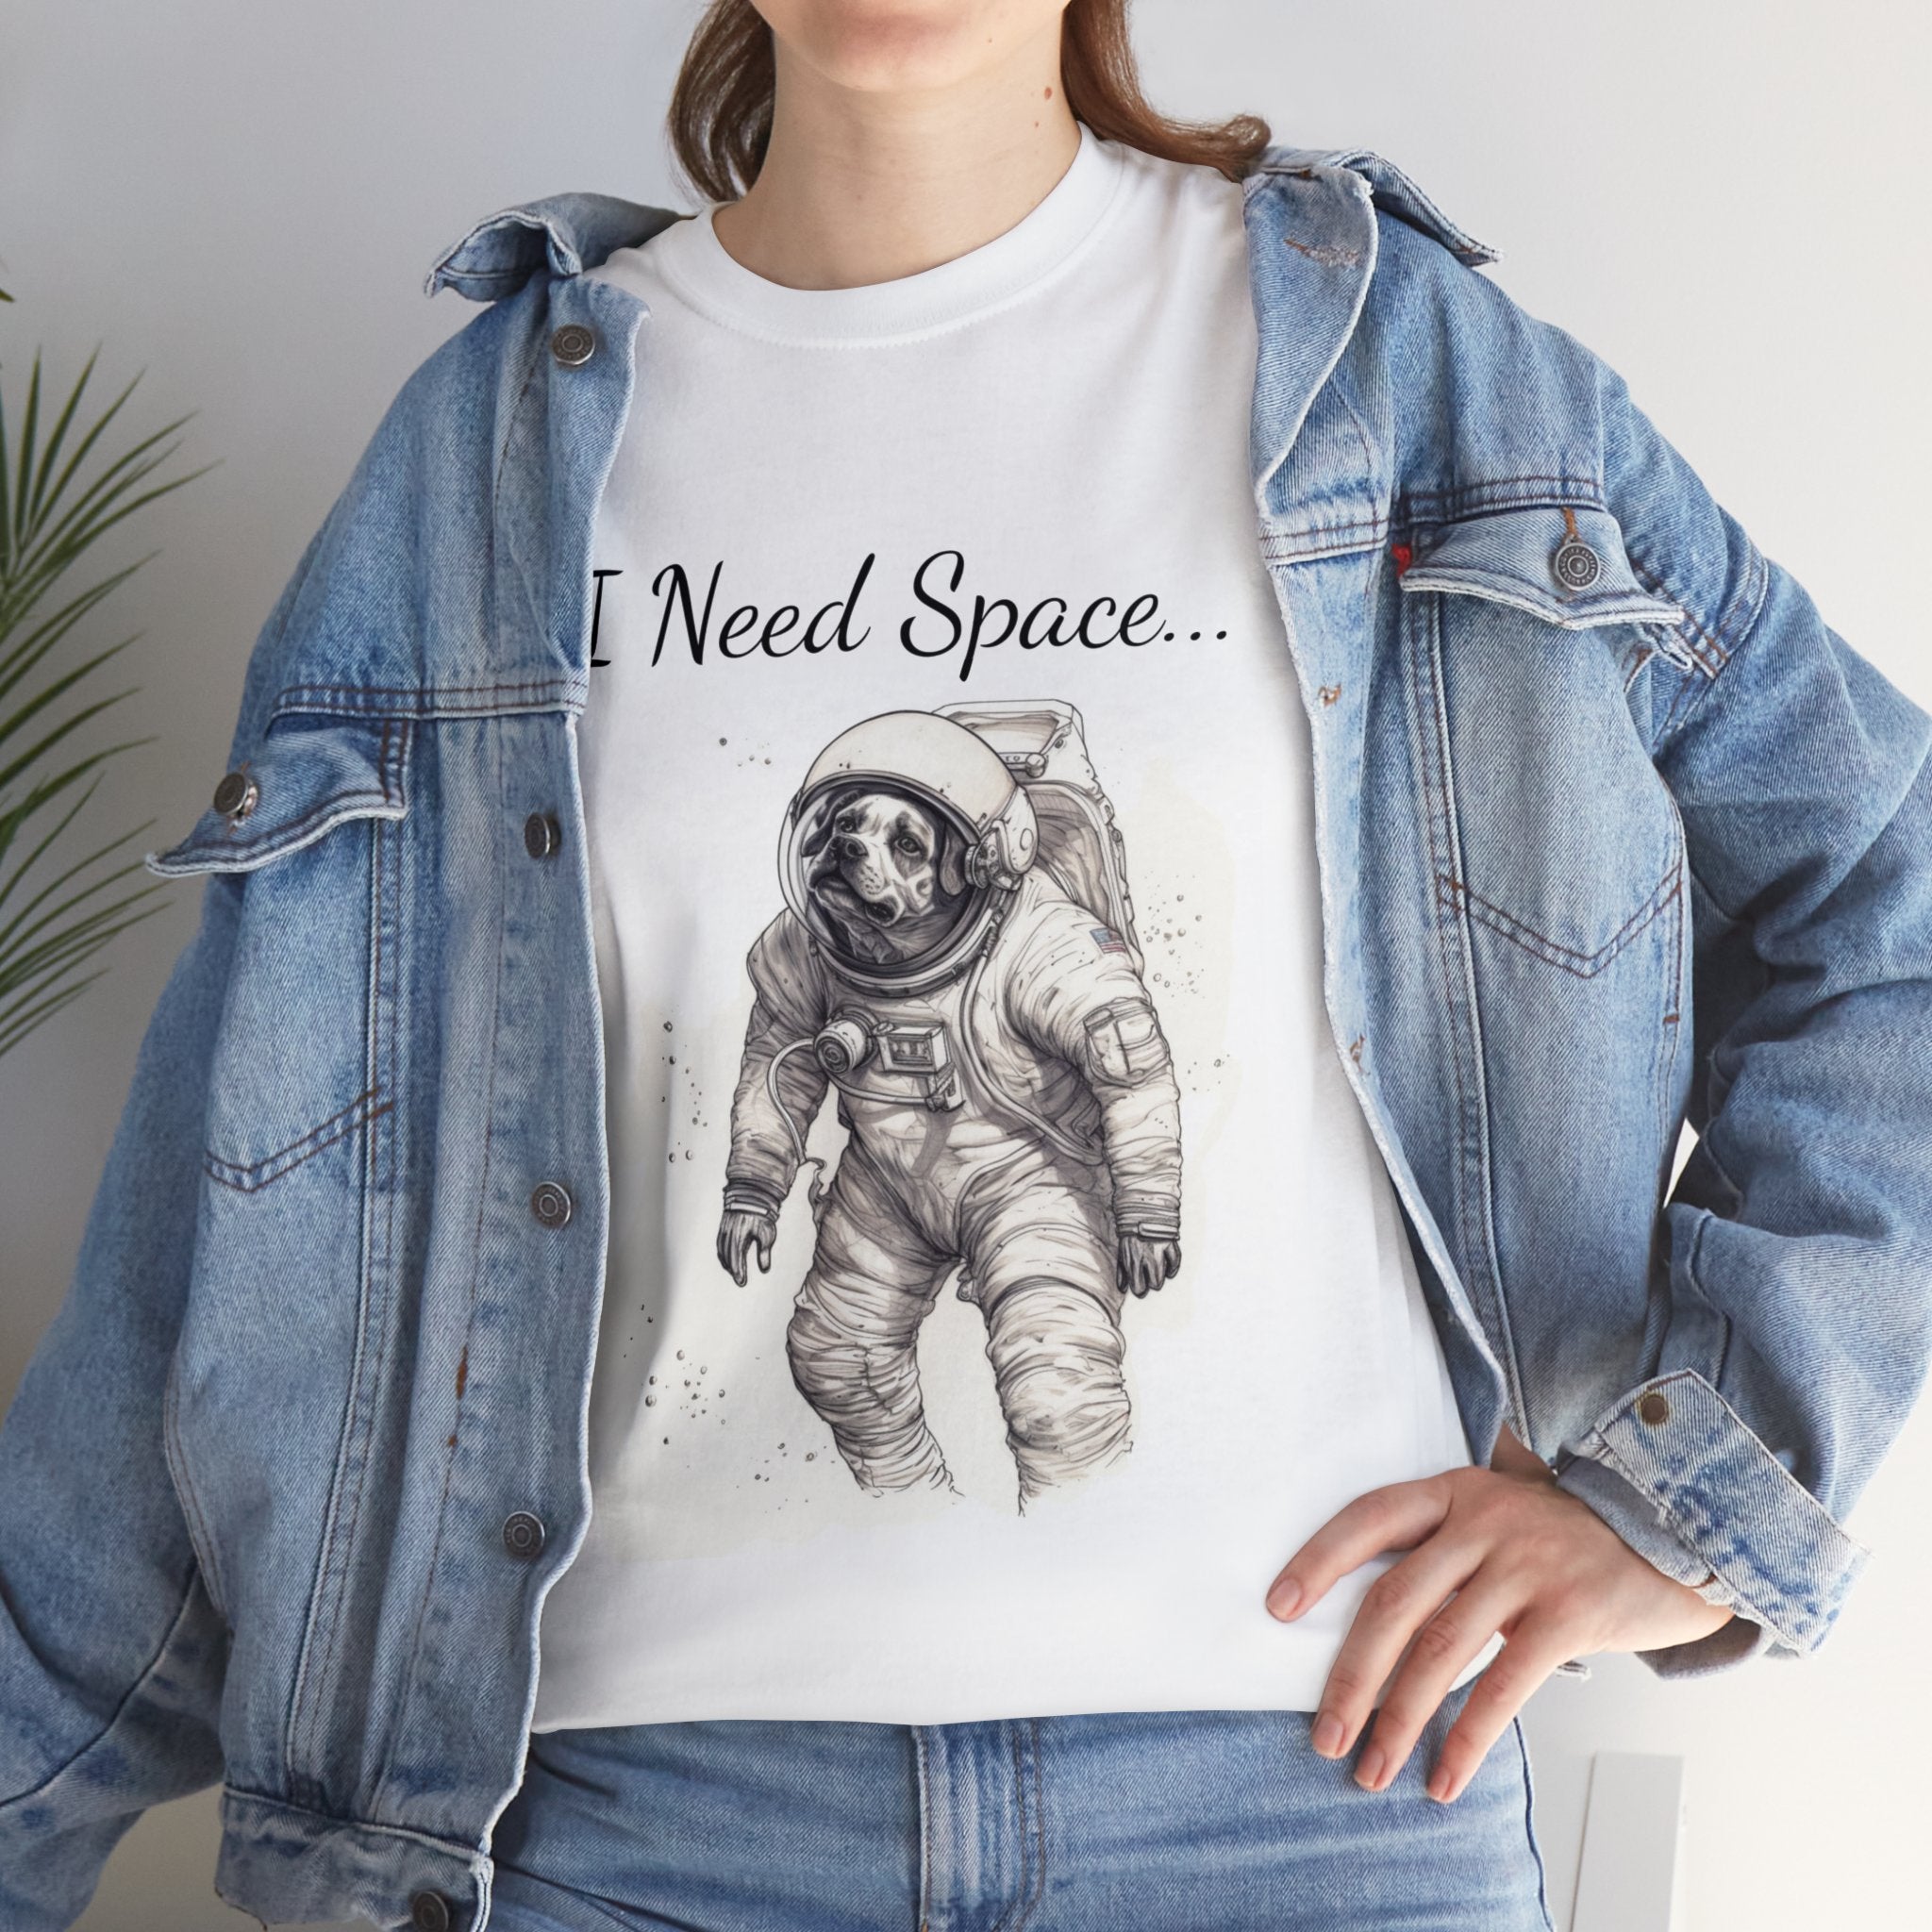 "Astronaut Dog 'I Need Space' Exploration Adventure Unisex Heavy Cotton Tee - Cosmic Canine Whimsy & Galactic Humor Design: A Stellar Fashion Statement"